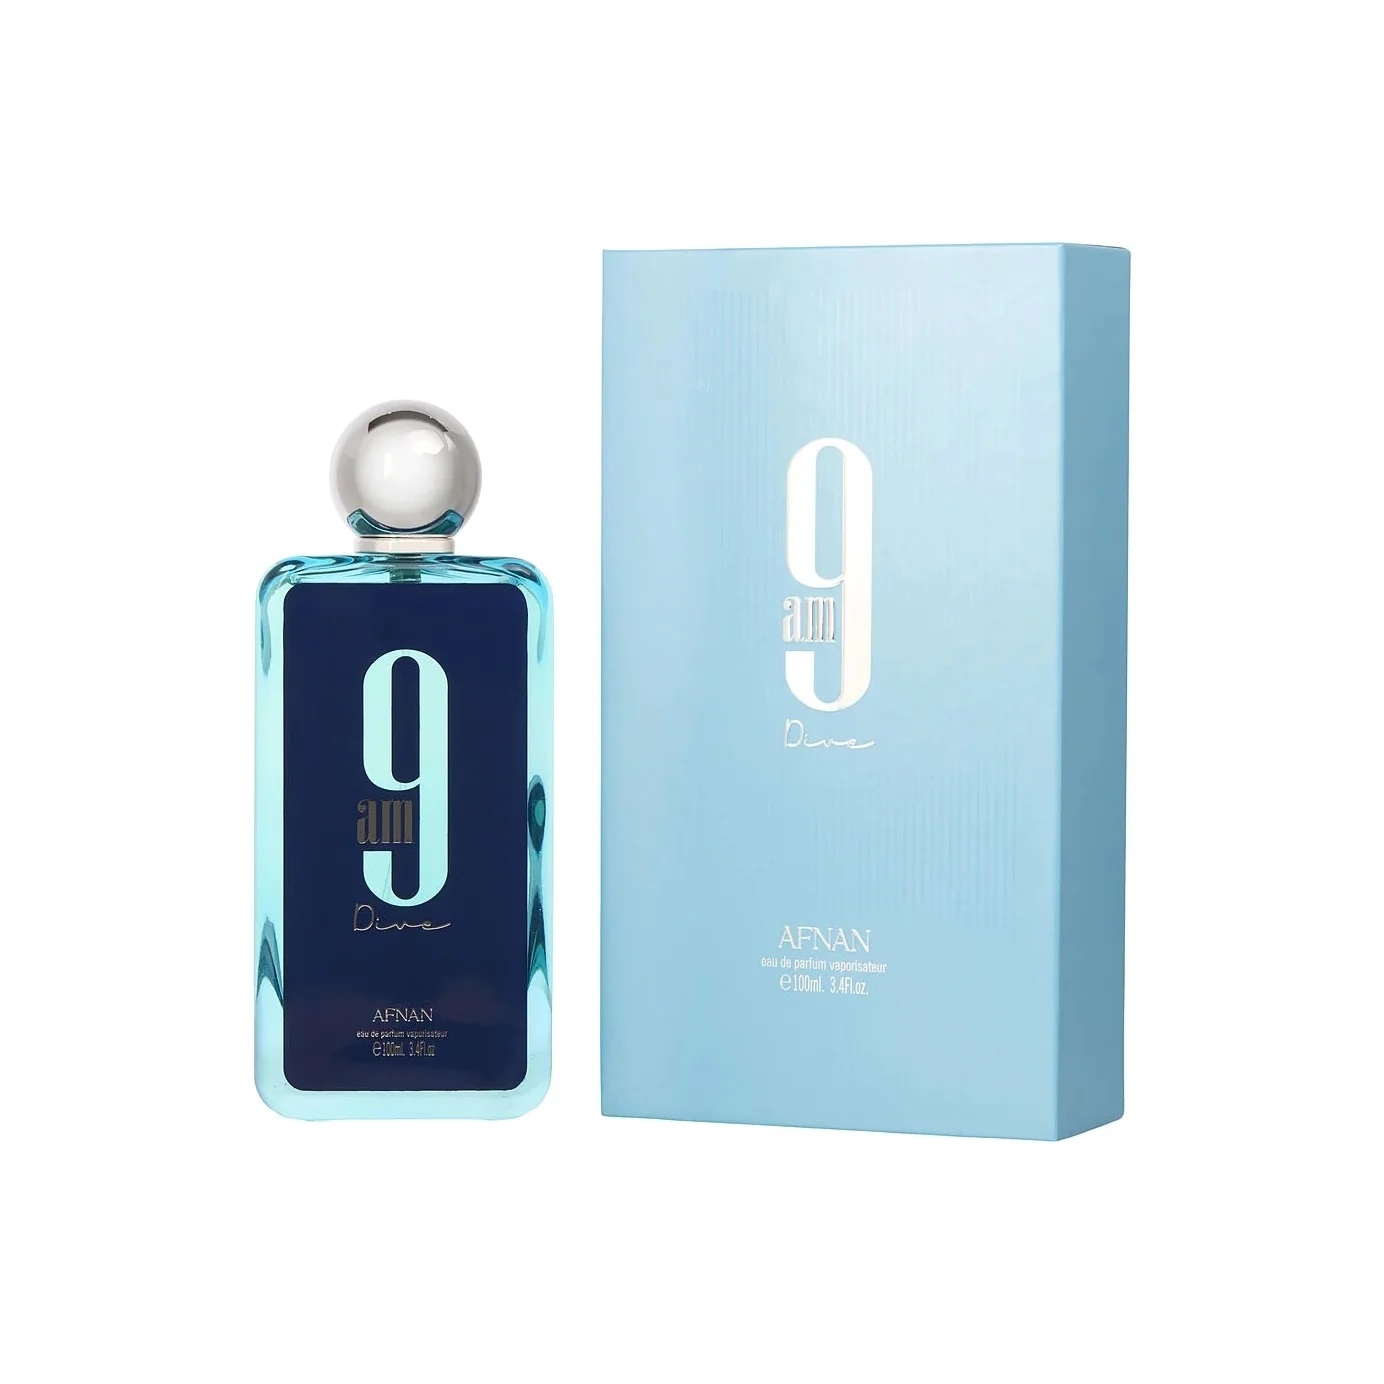 9 Am Dive By Afnan EDP Spray 3.4 Oz For Women